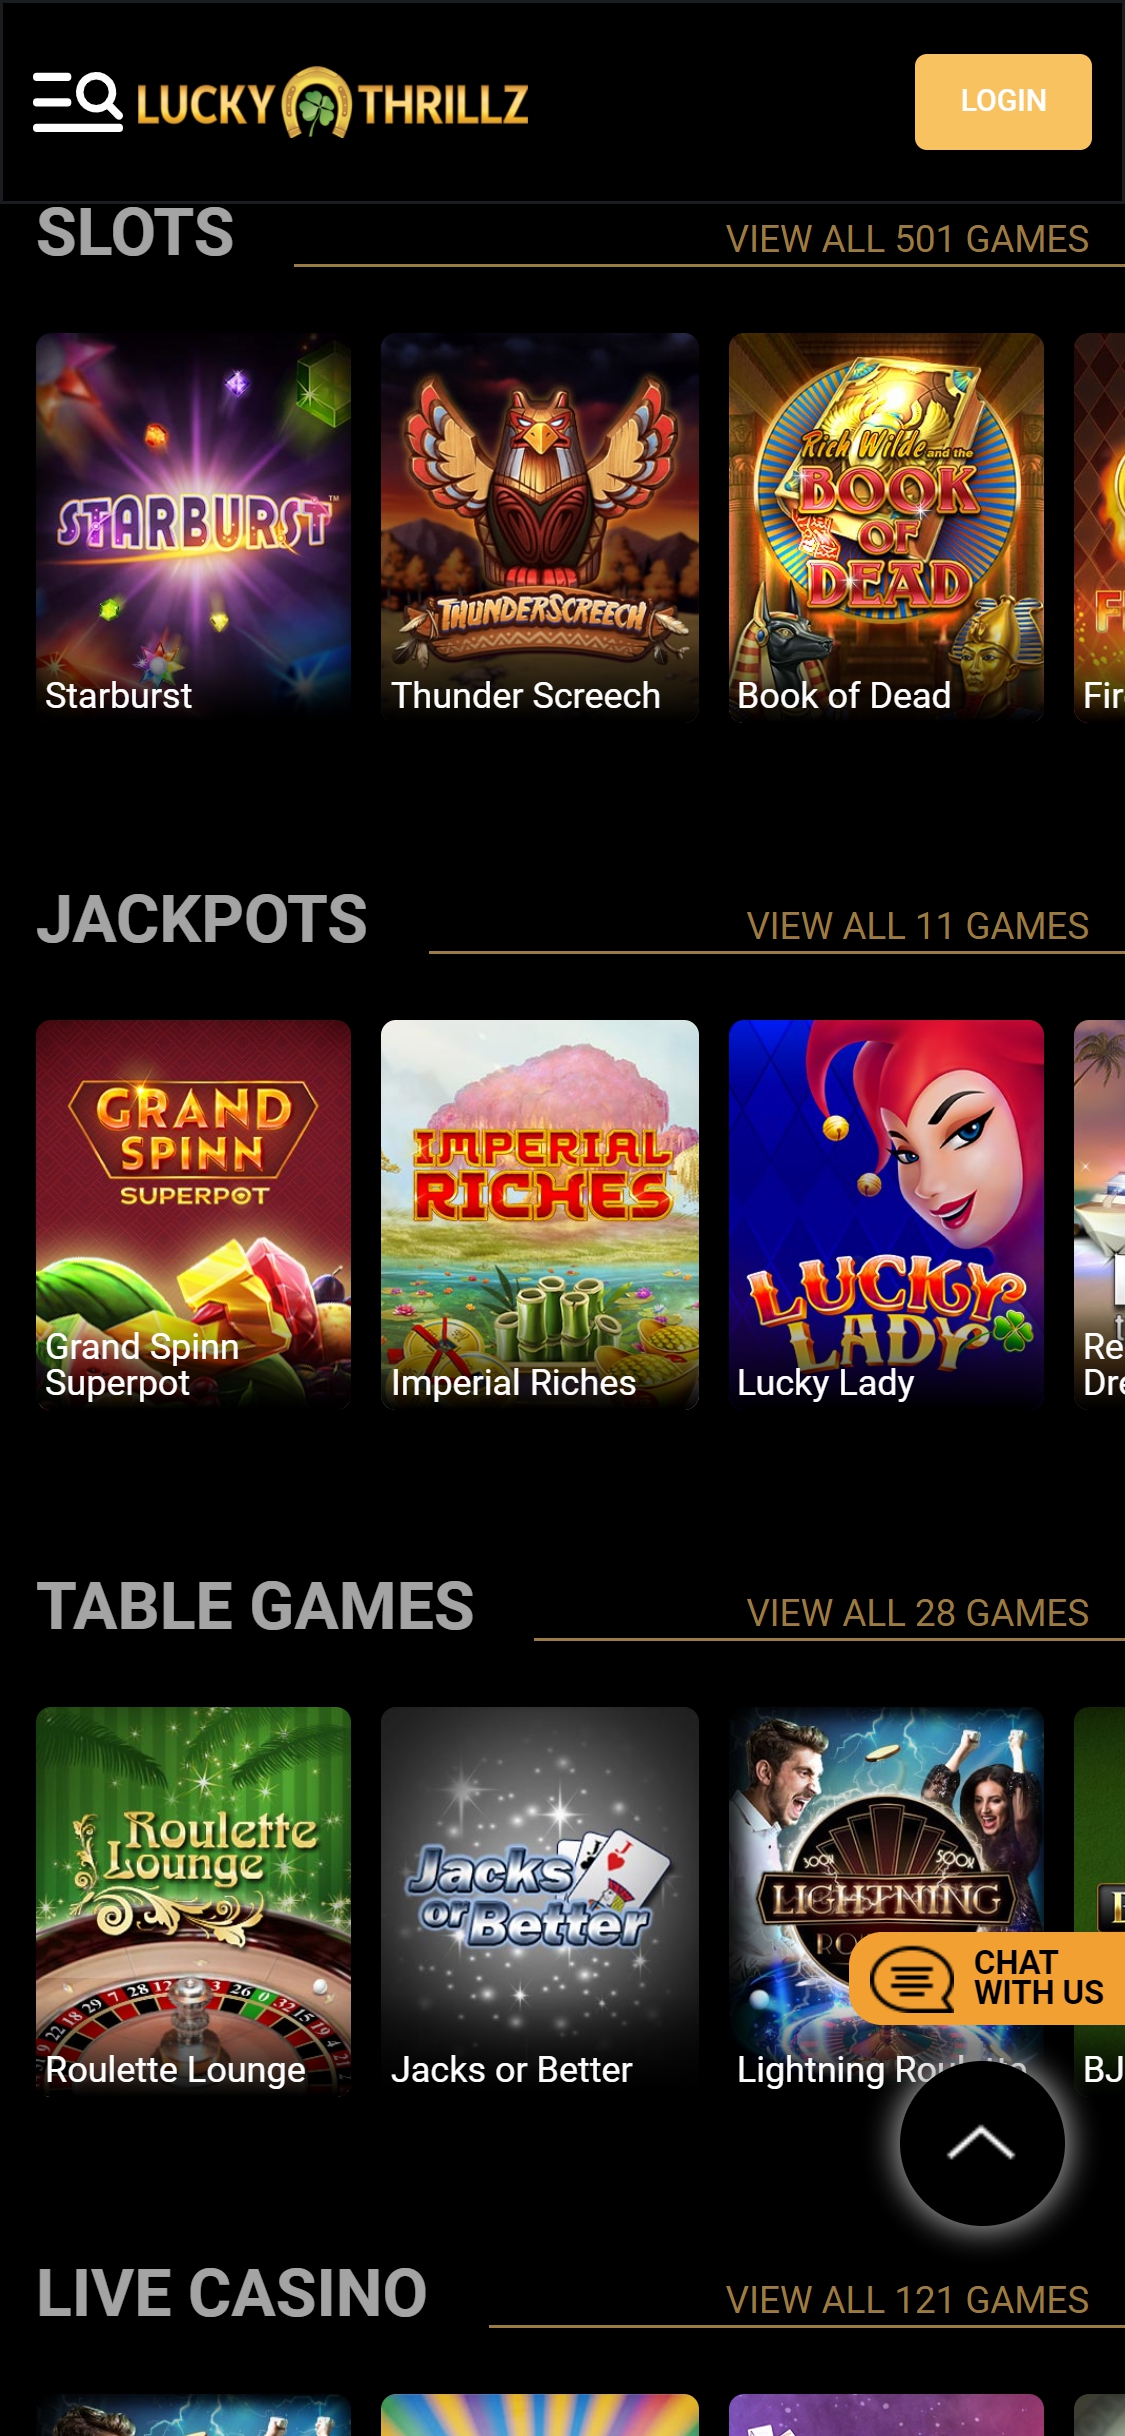 Lucky Thrillz Casino Mobile Games Review